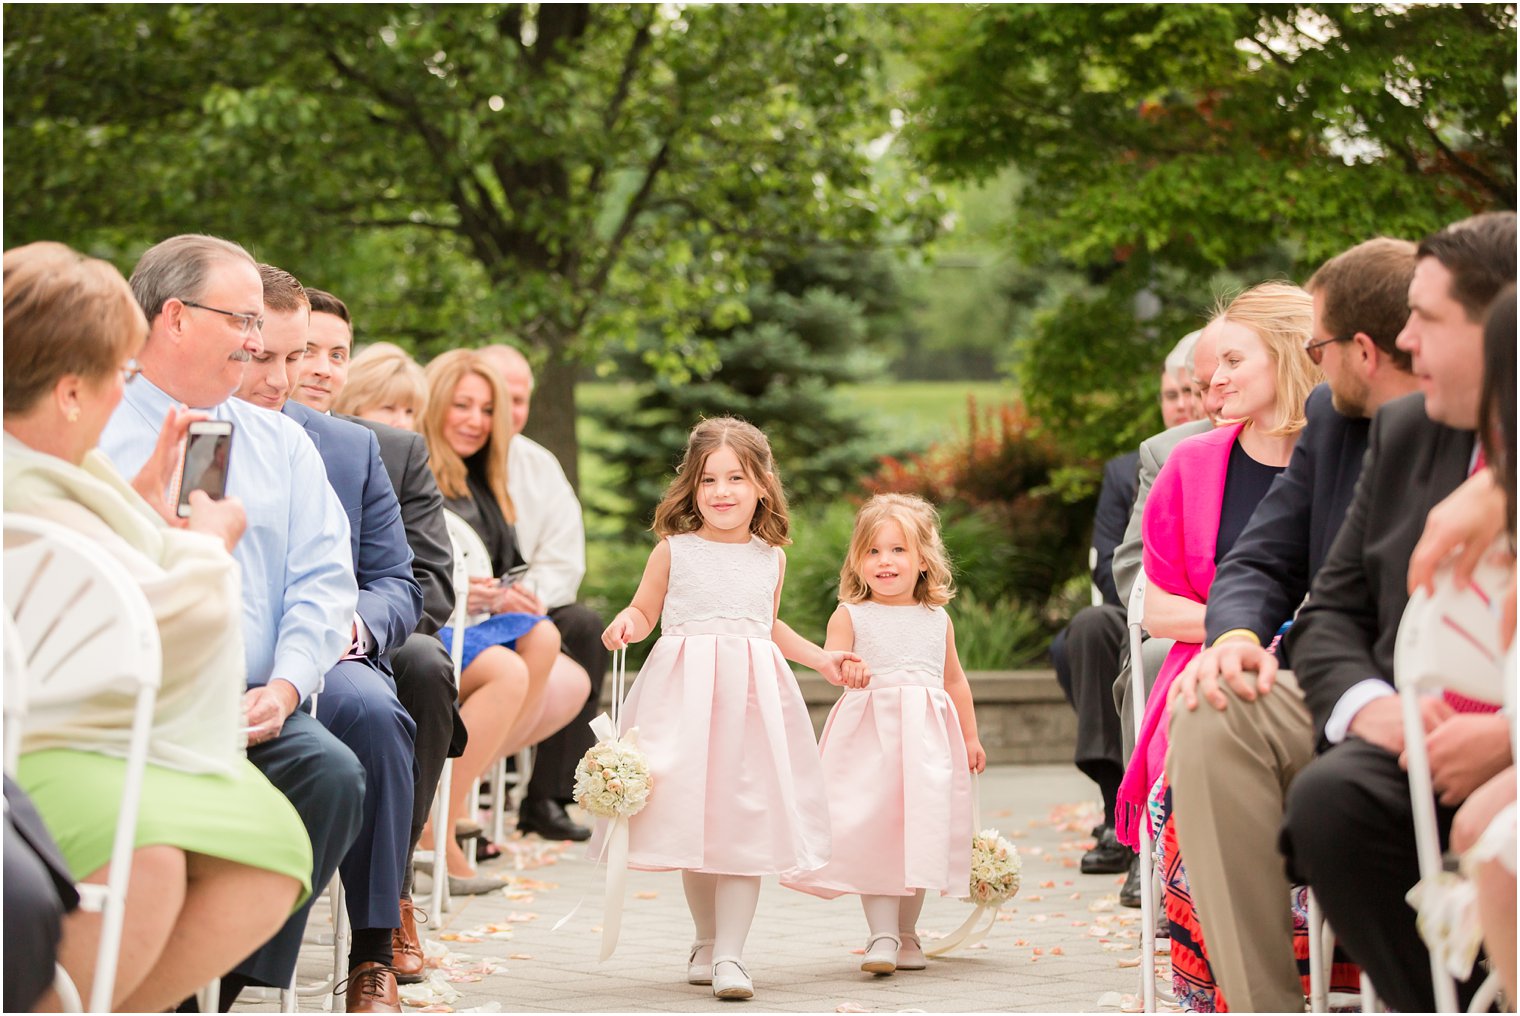 Flower girls at Windows on the Water at Frogbridge | Photos by Idalia Photography